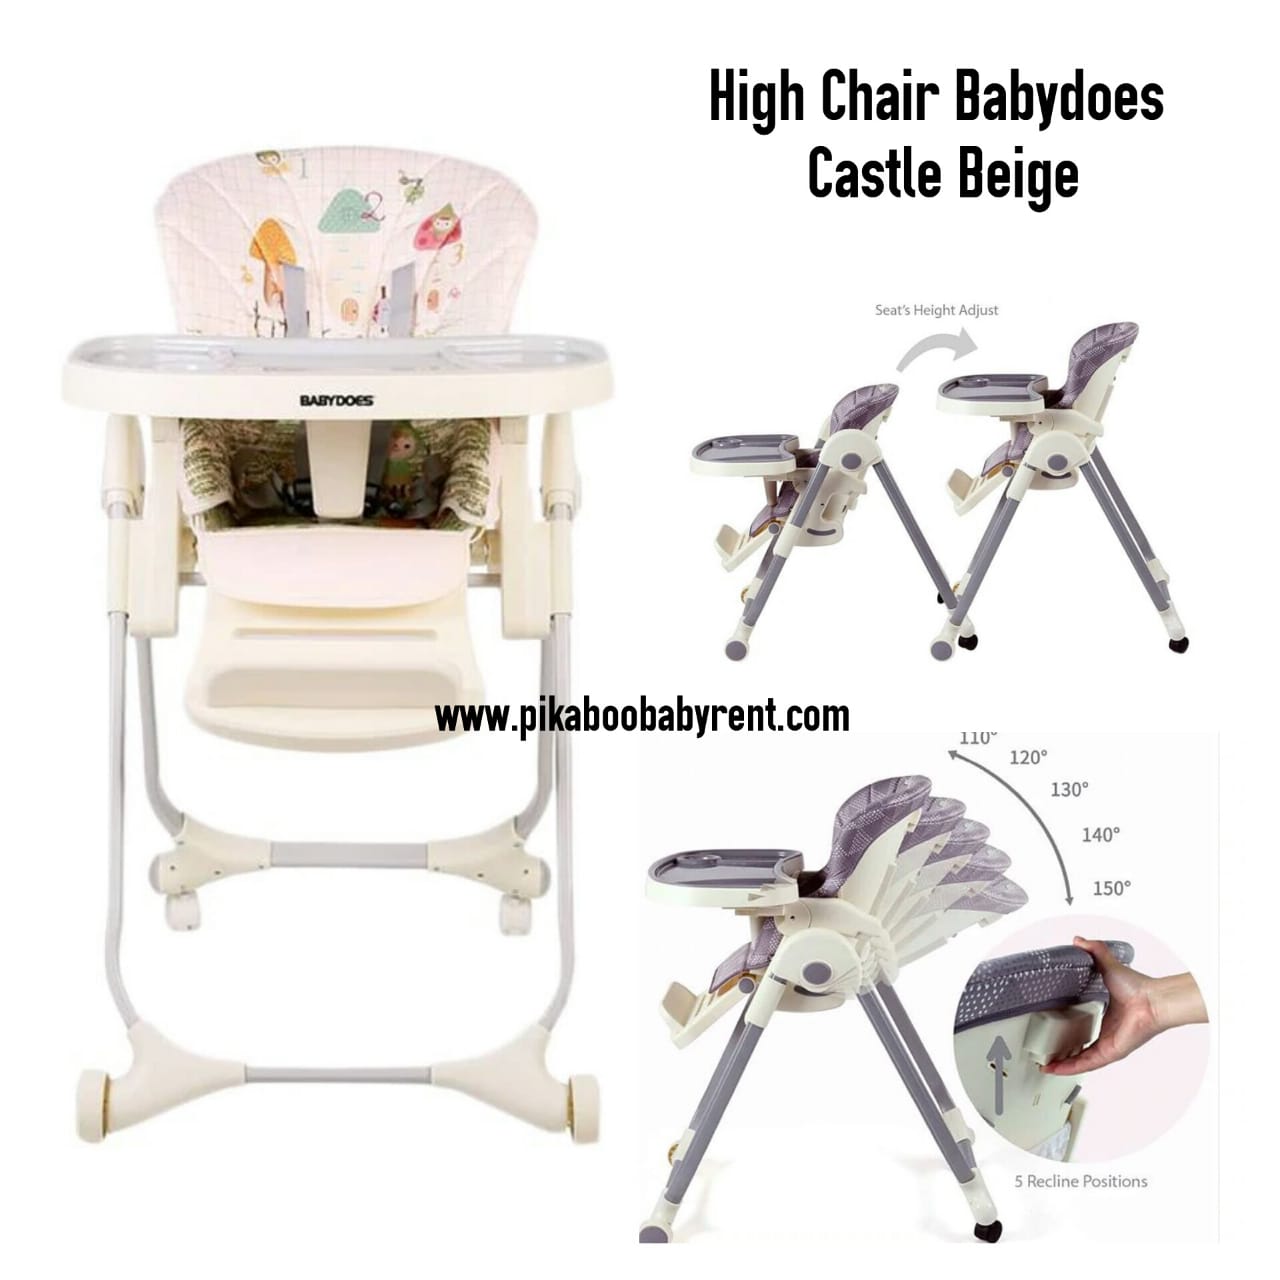 HIGH CHAIR BABYDOES DINERS CASTLE BEIGE